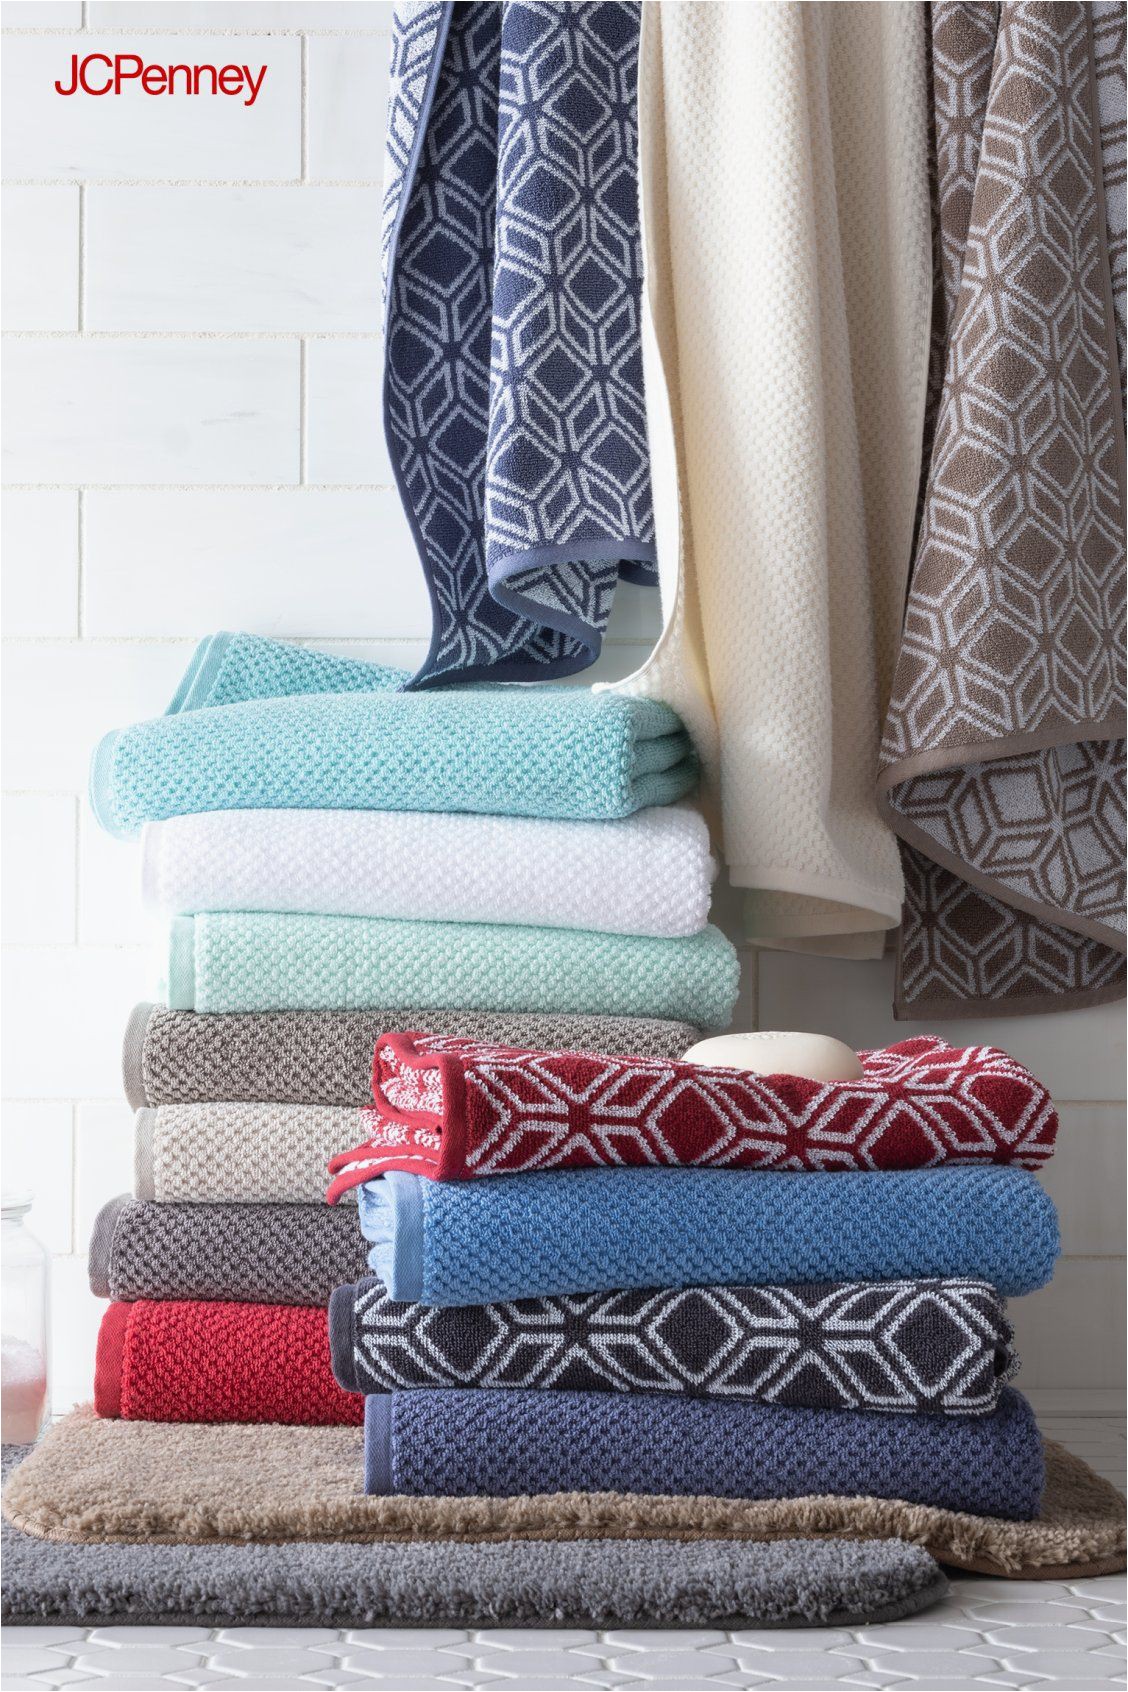 Jcpenney Bath Rugs Carpet Throw Out the Boring Beige towels and Add A Splash Of Color